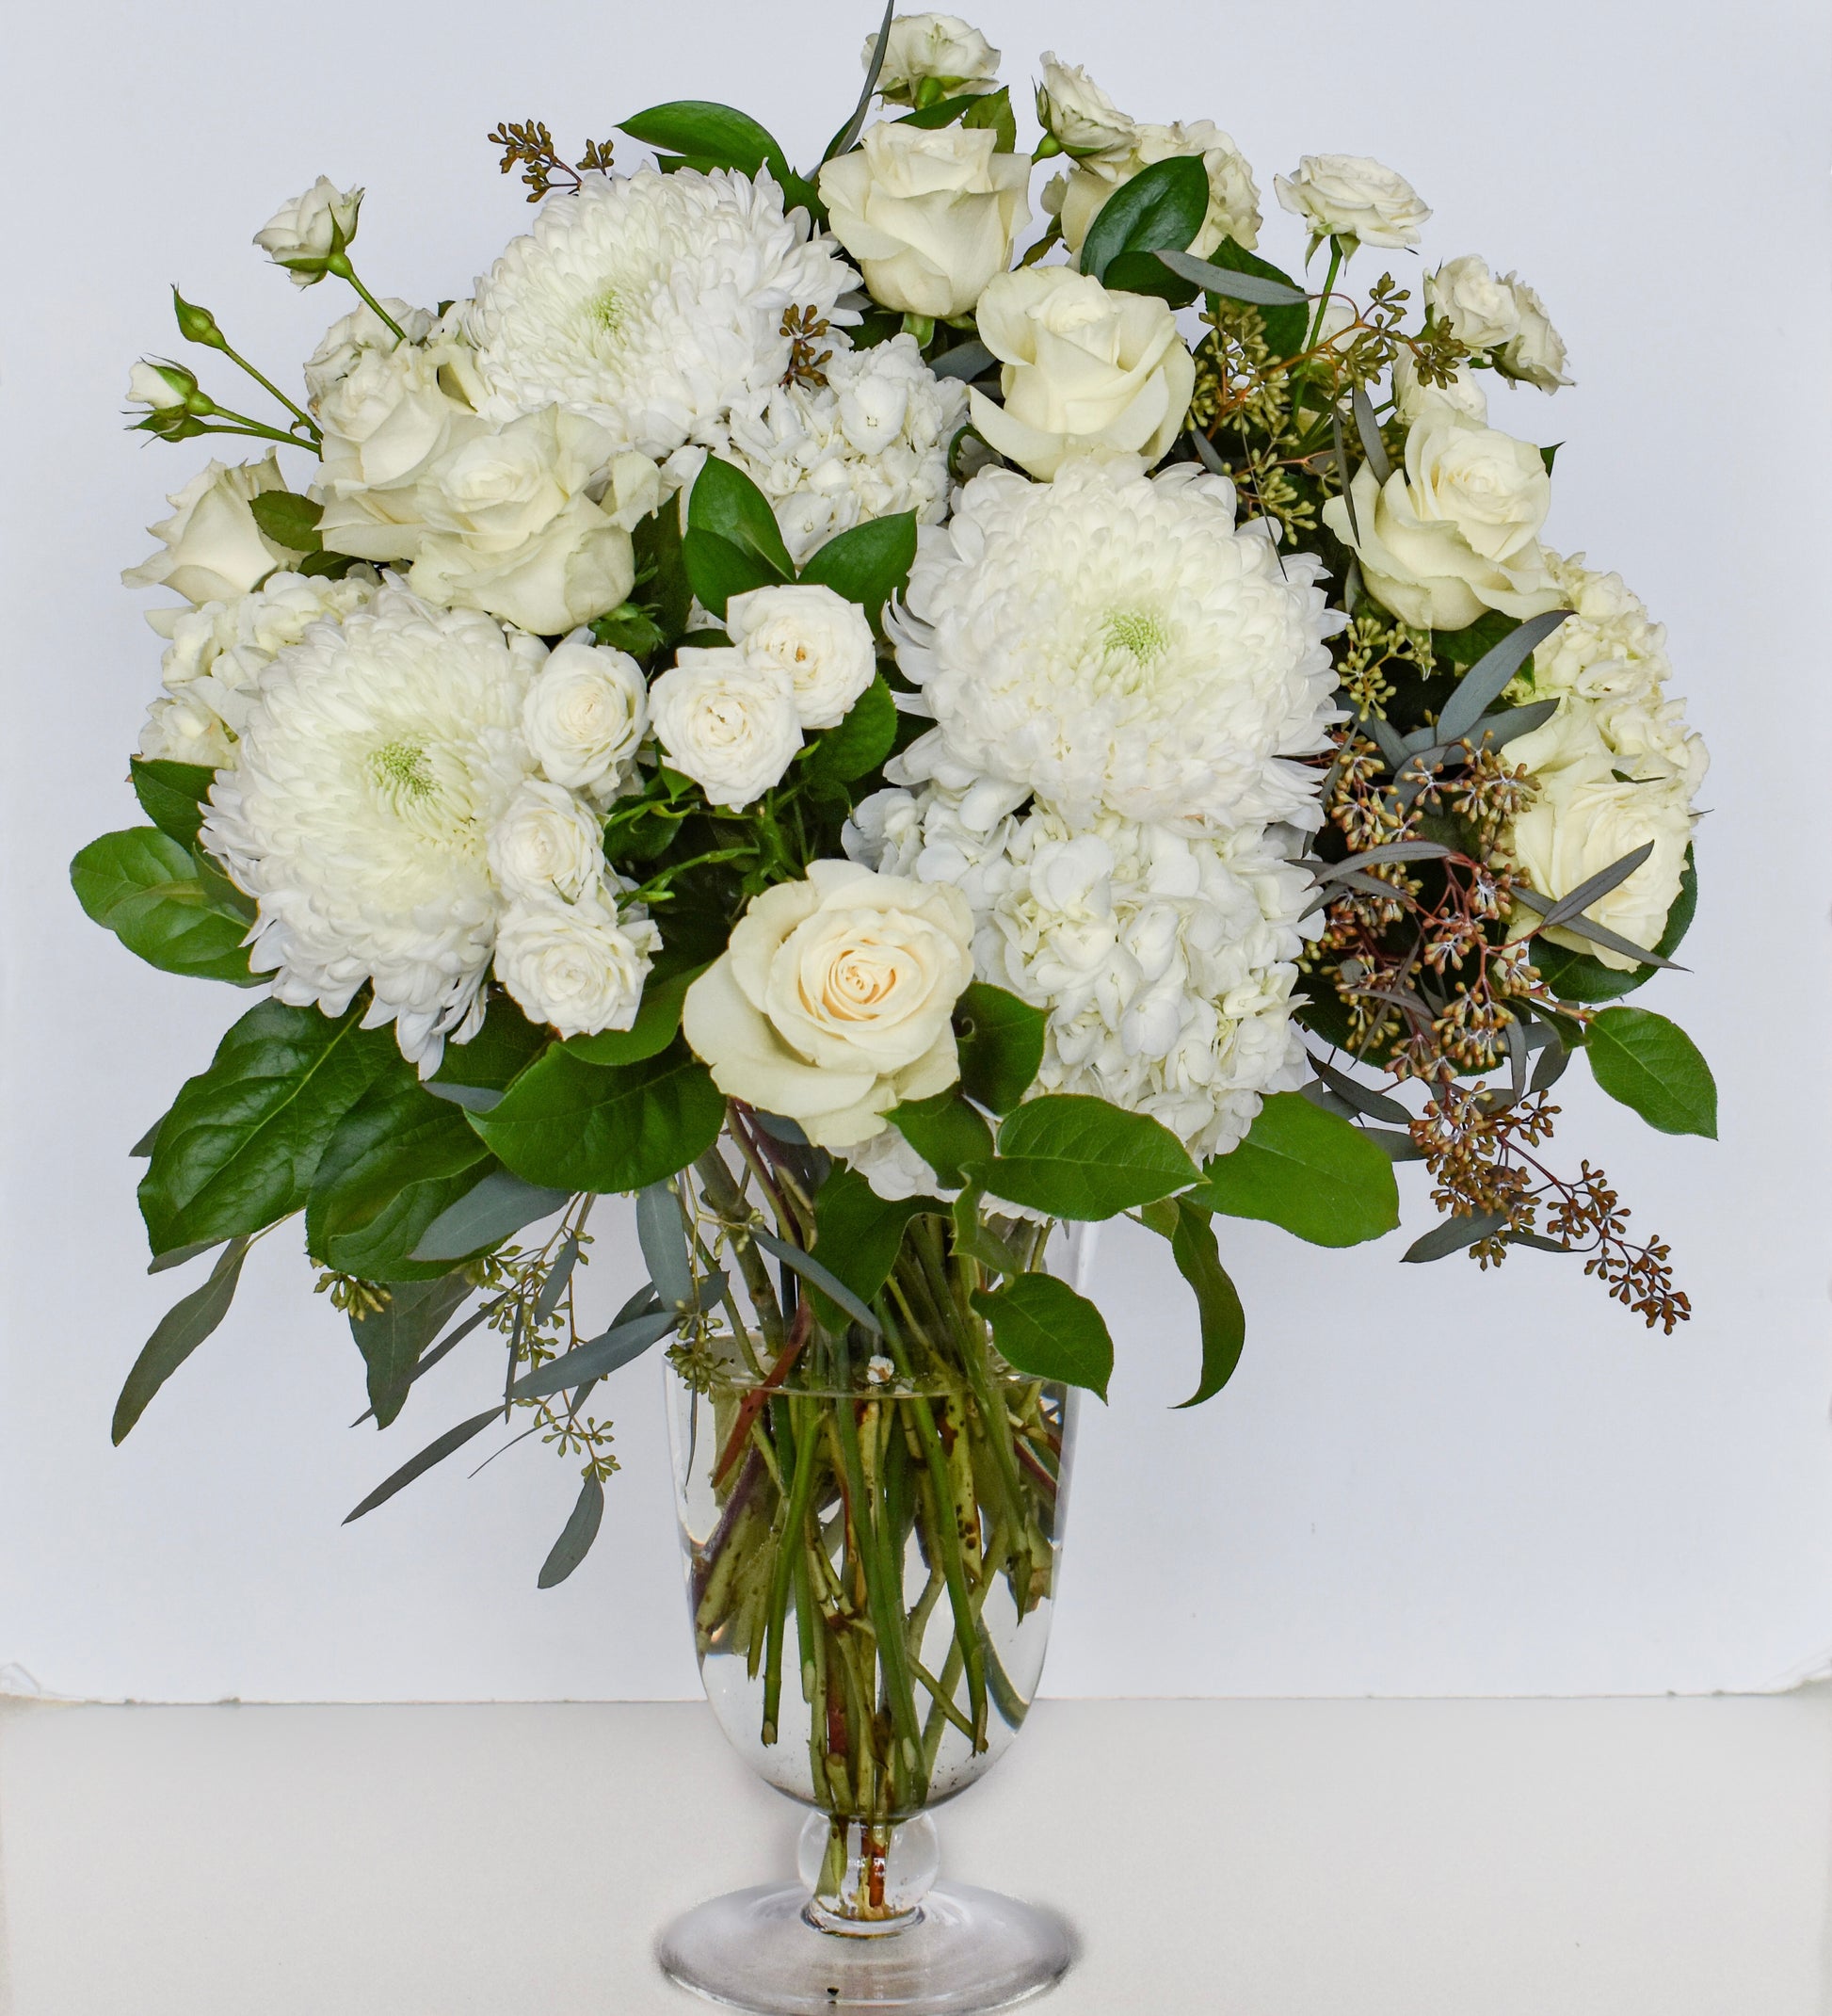 White flowers arranged in a tall glass footed vase